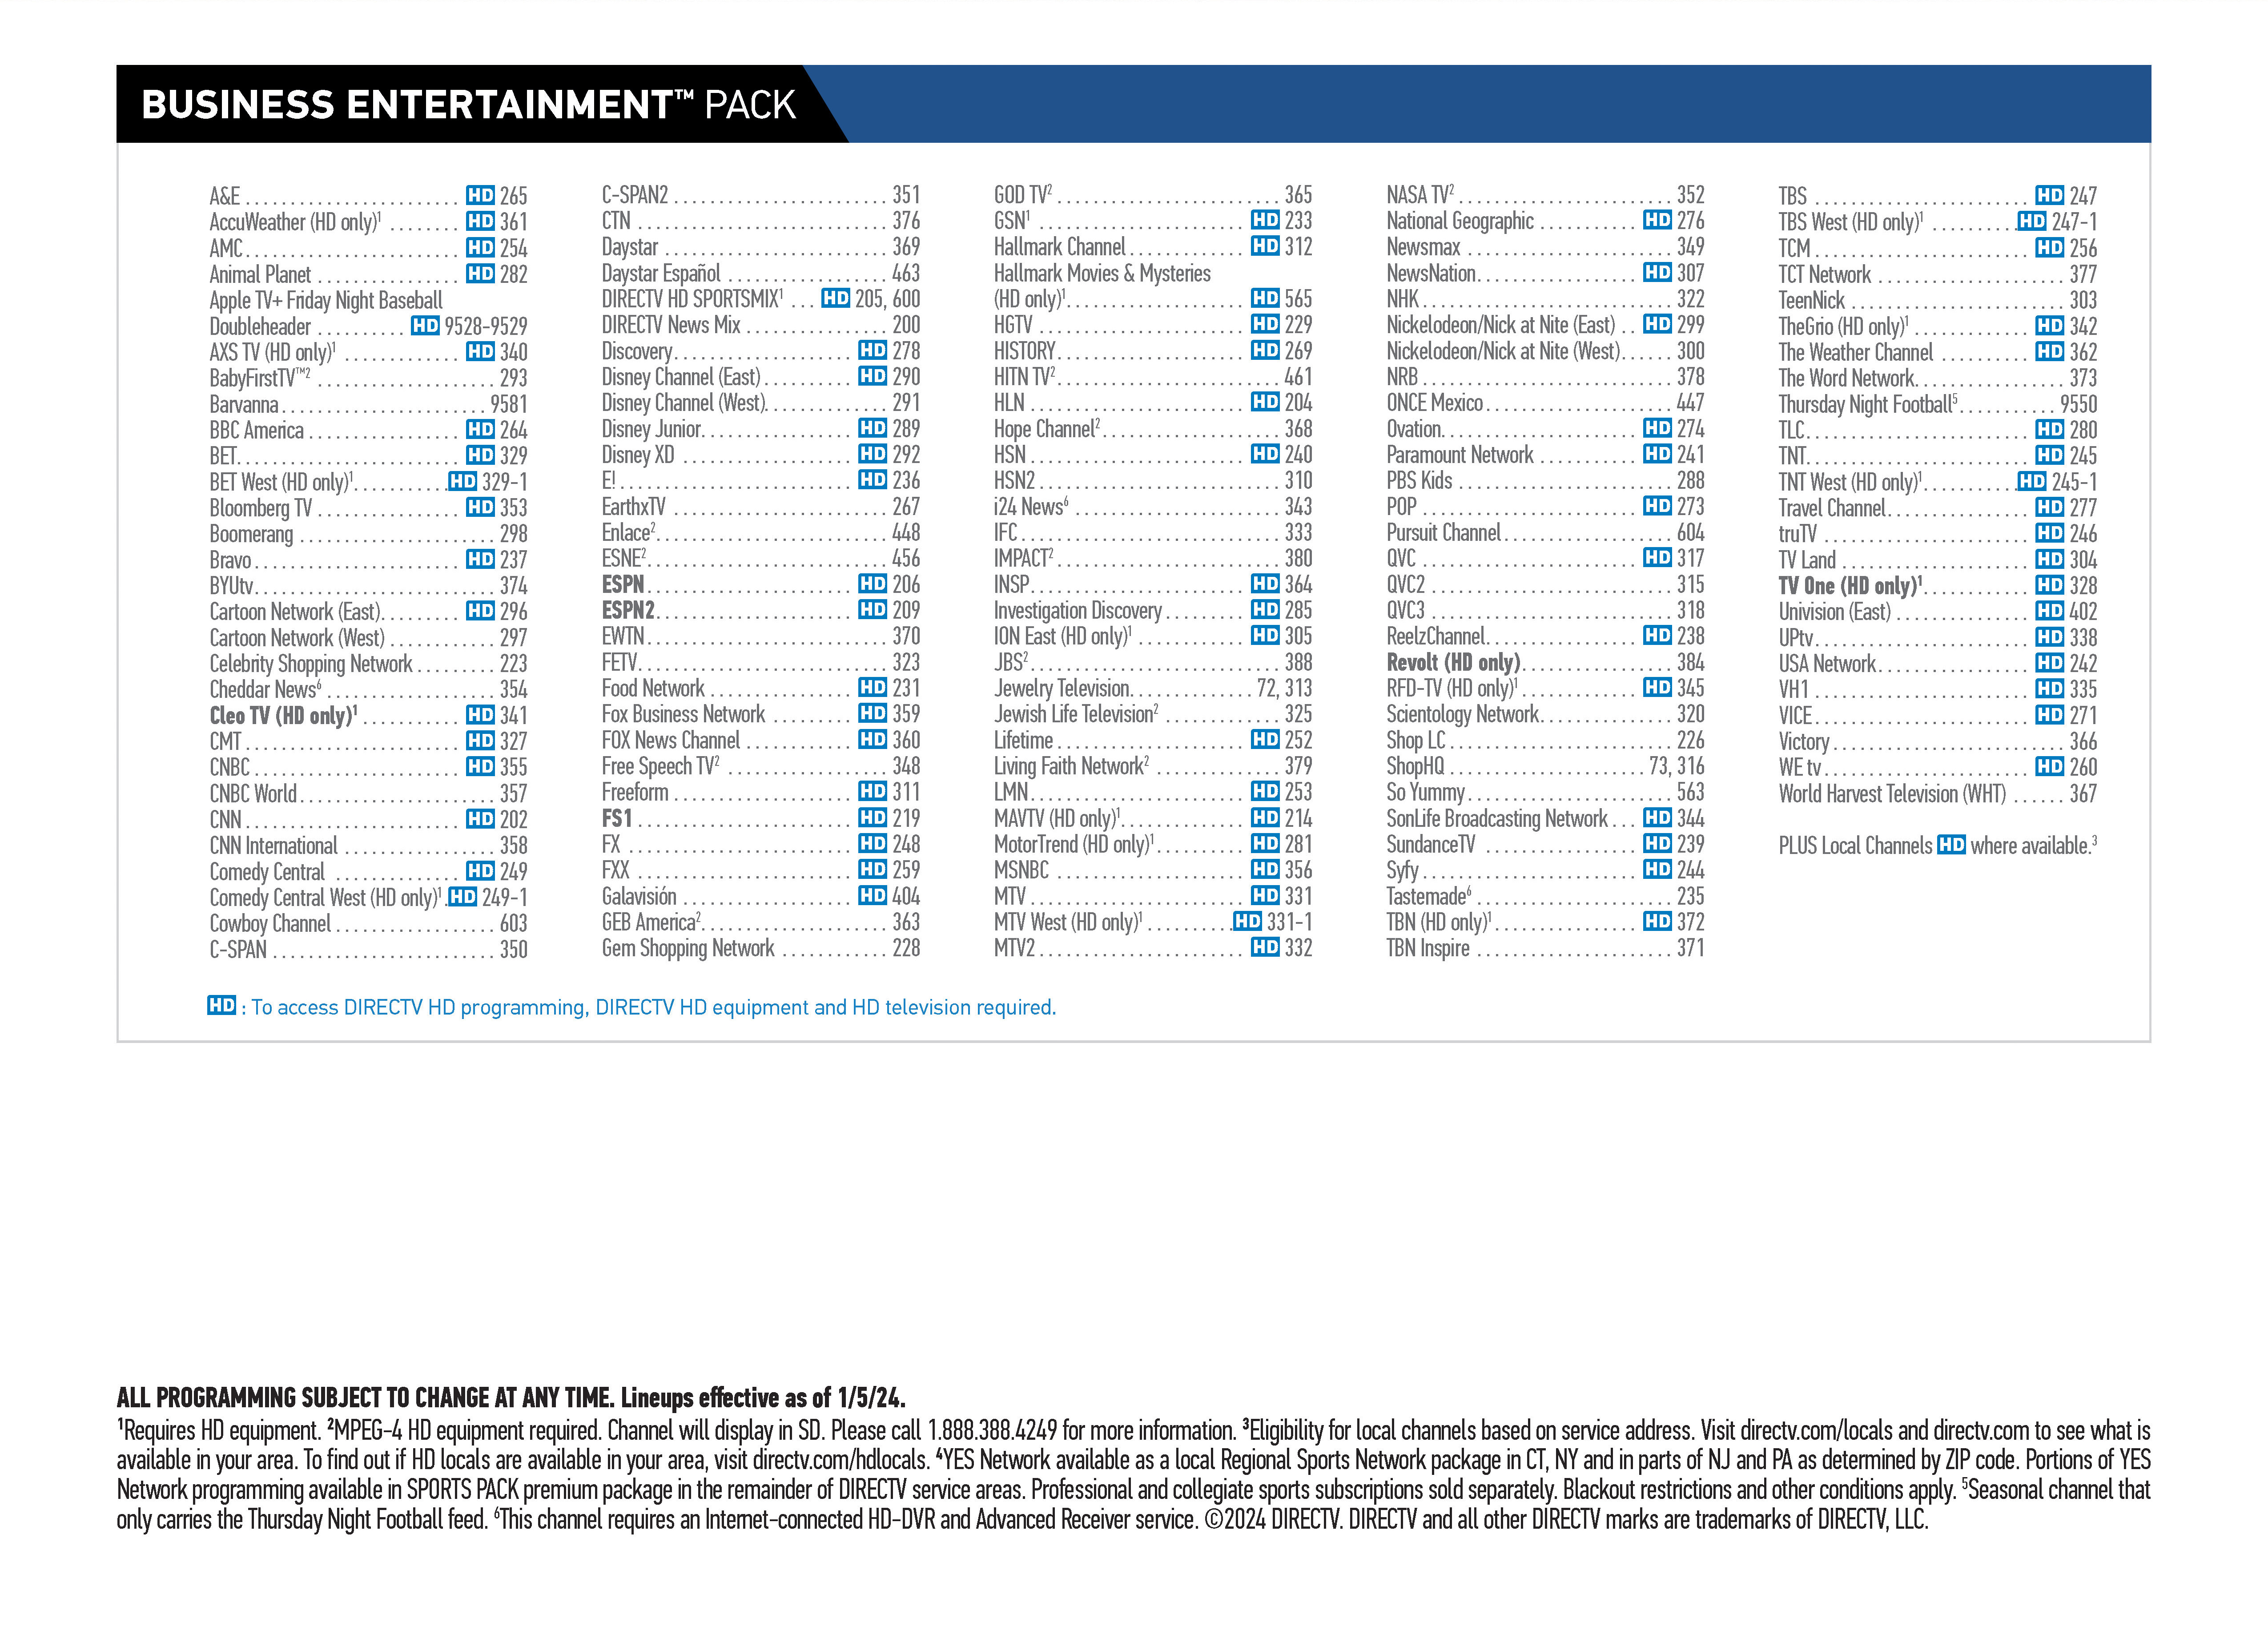 BUSINESS ENTERTAINMENT™ PACK channel lineup, effective as of 1/5/24.